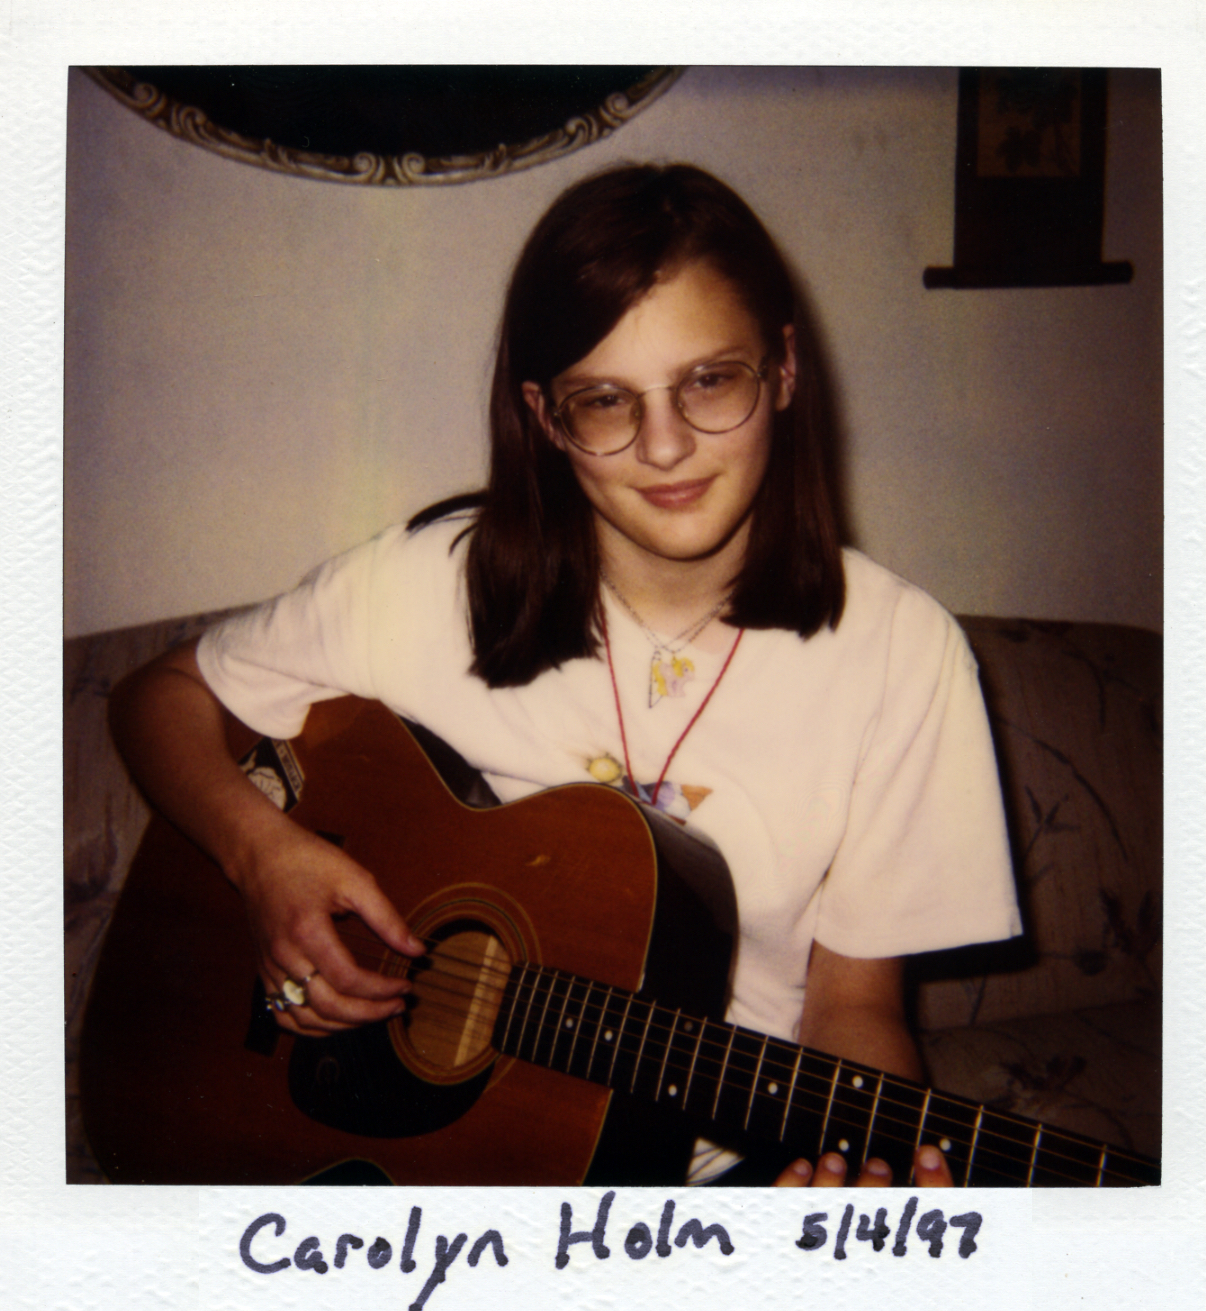 CJ Holm sitting on the sofa with her guitar